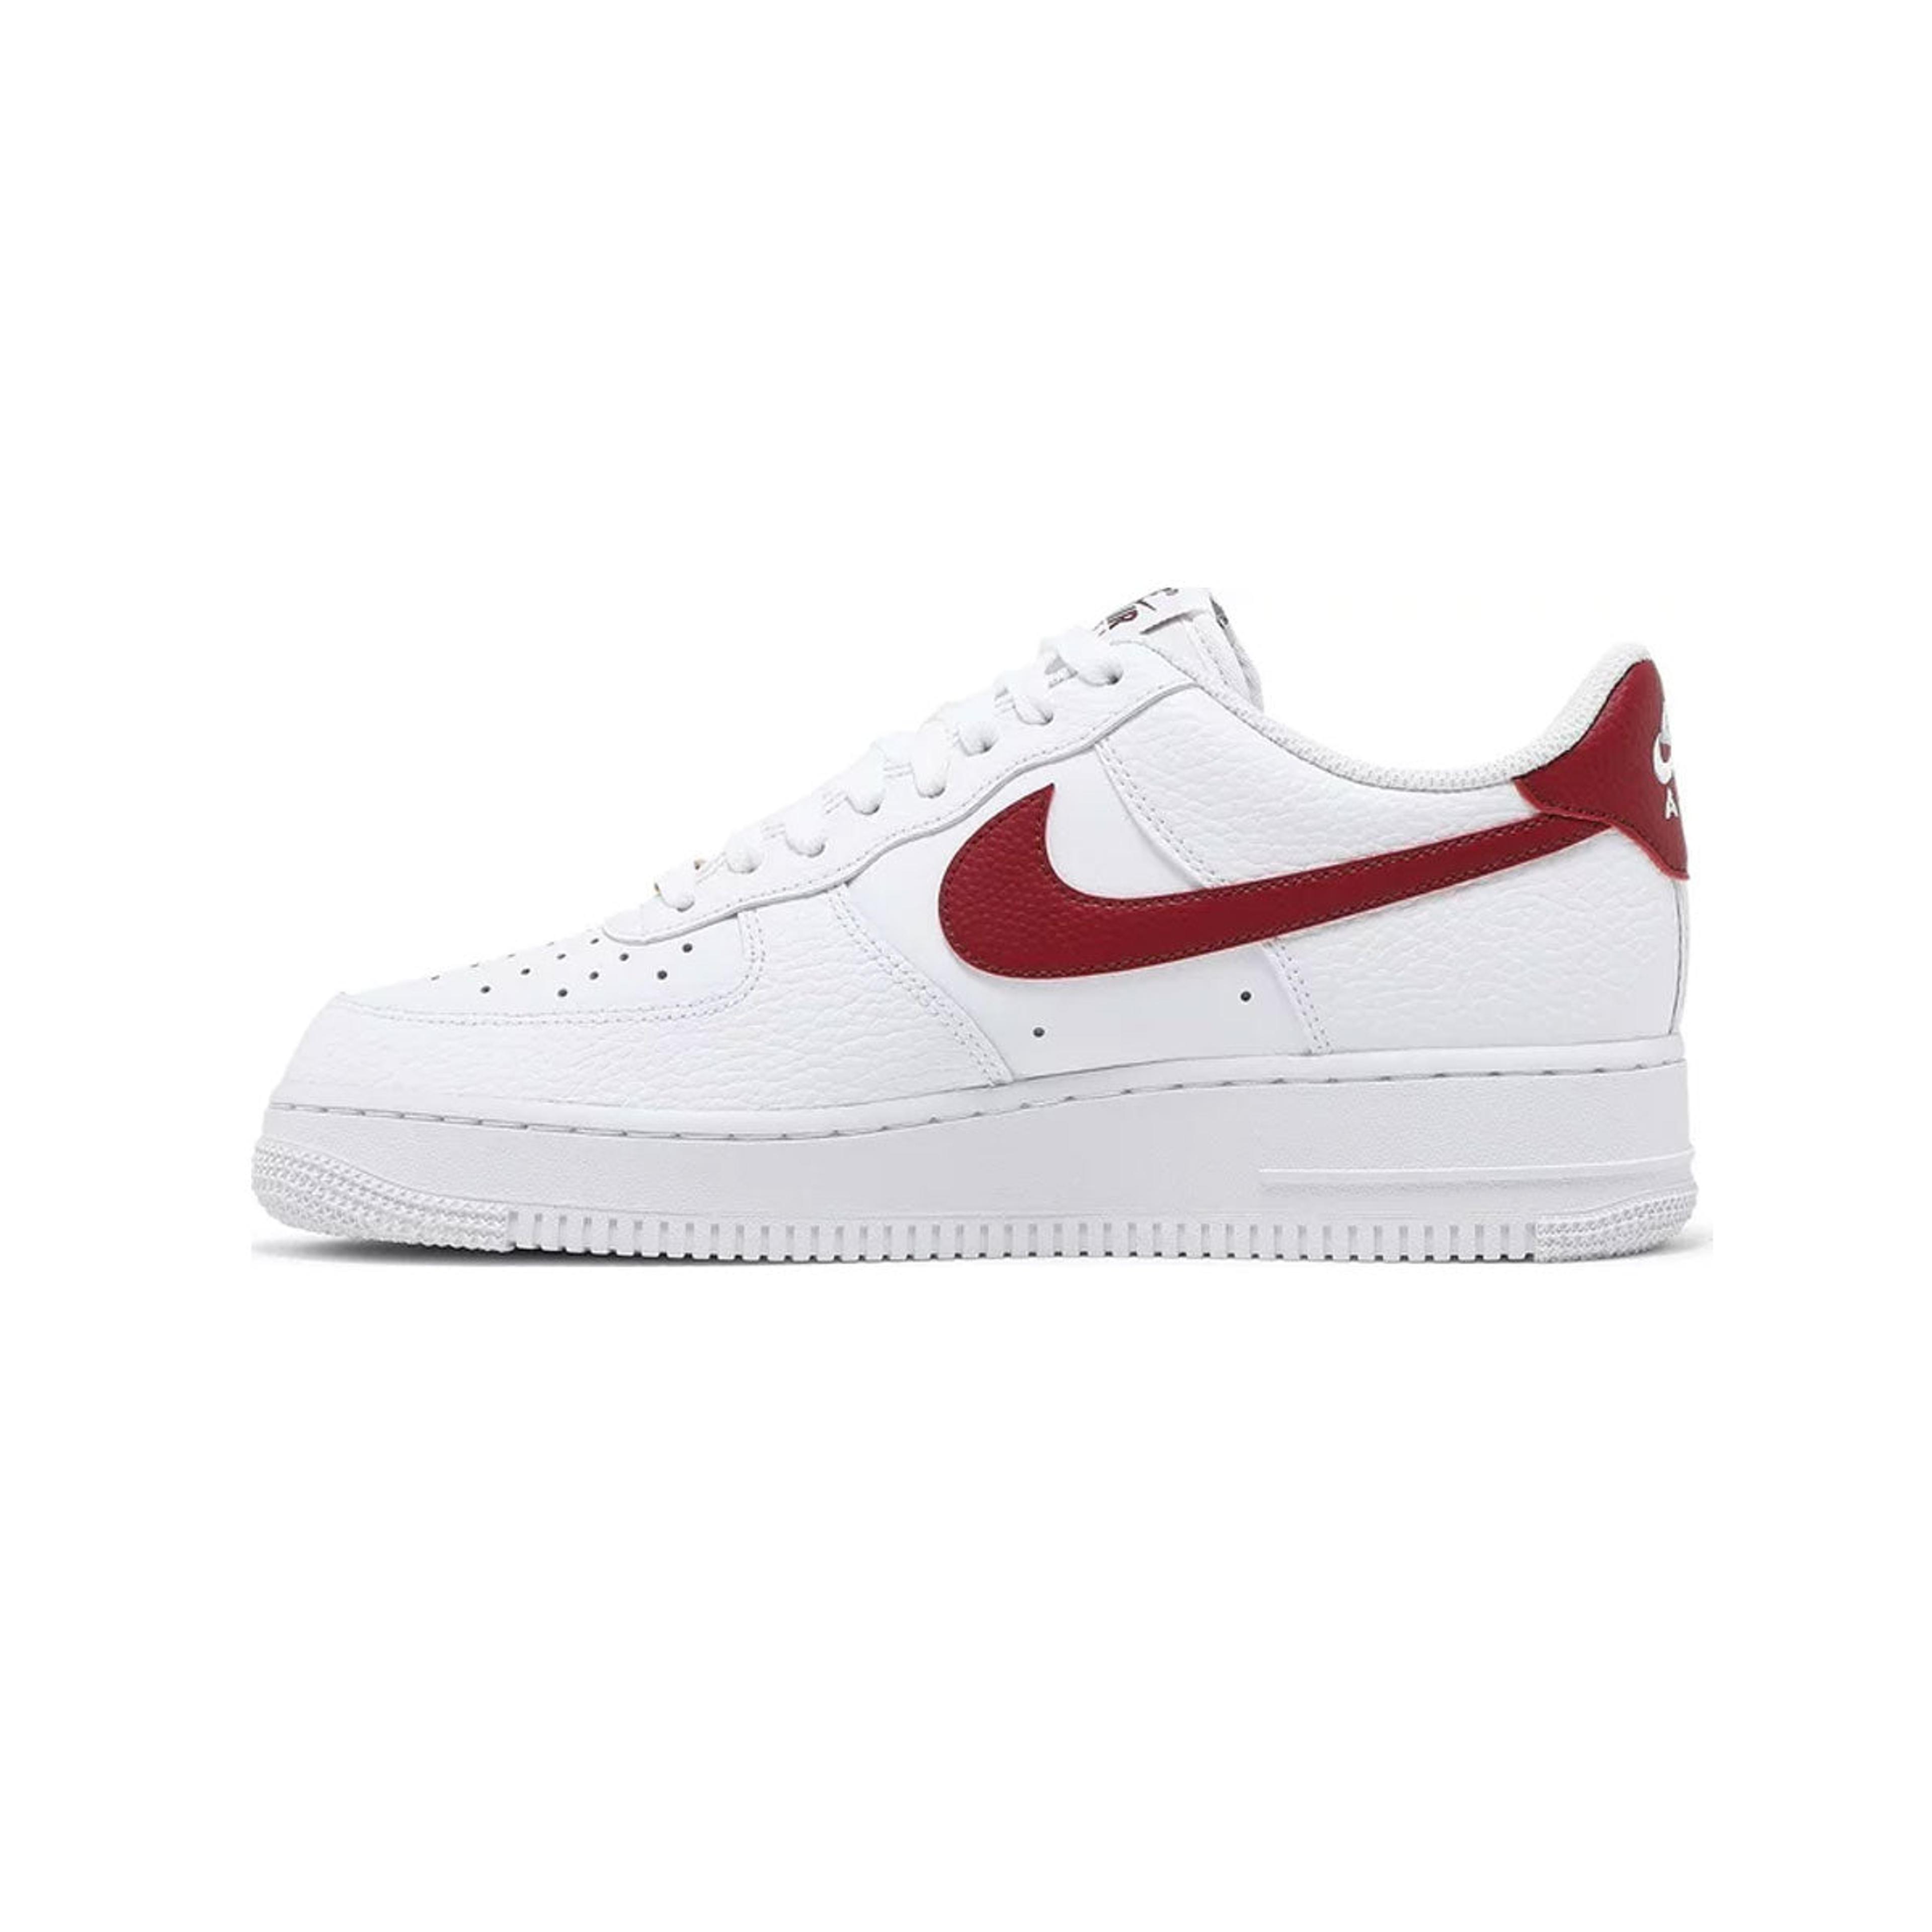 Alternate View 2 of Nike Air Force 1 '07 'White Team Red'